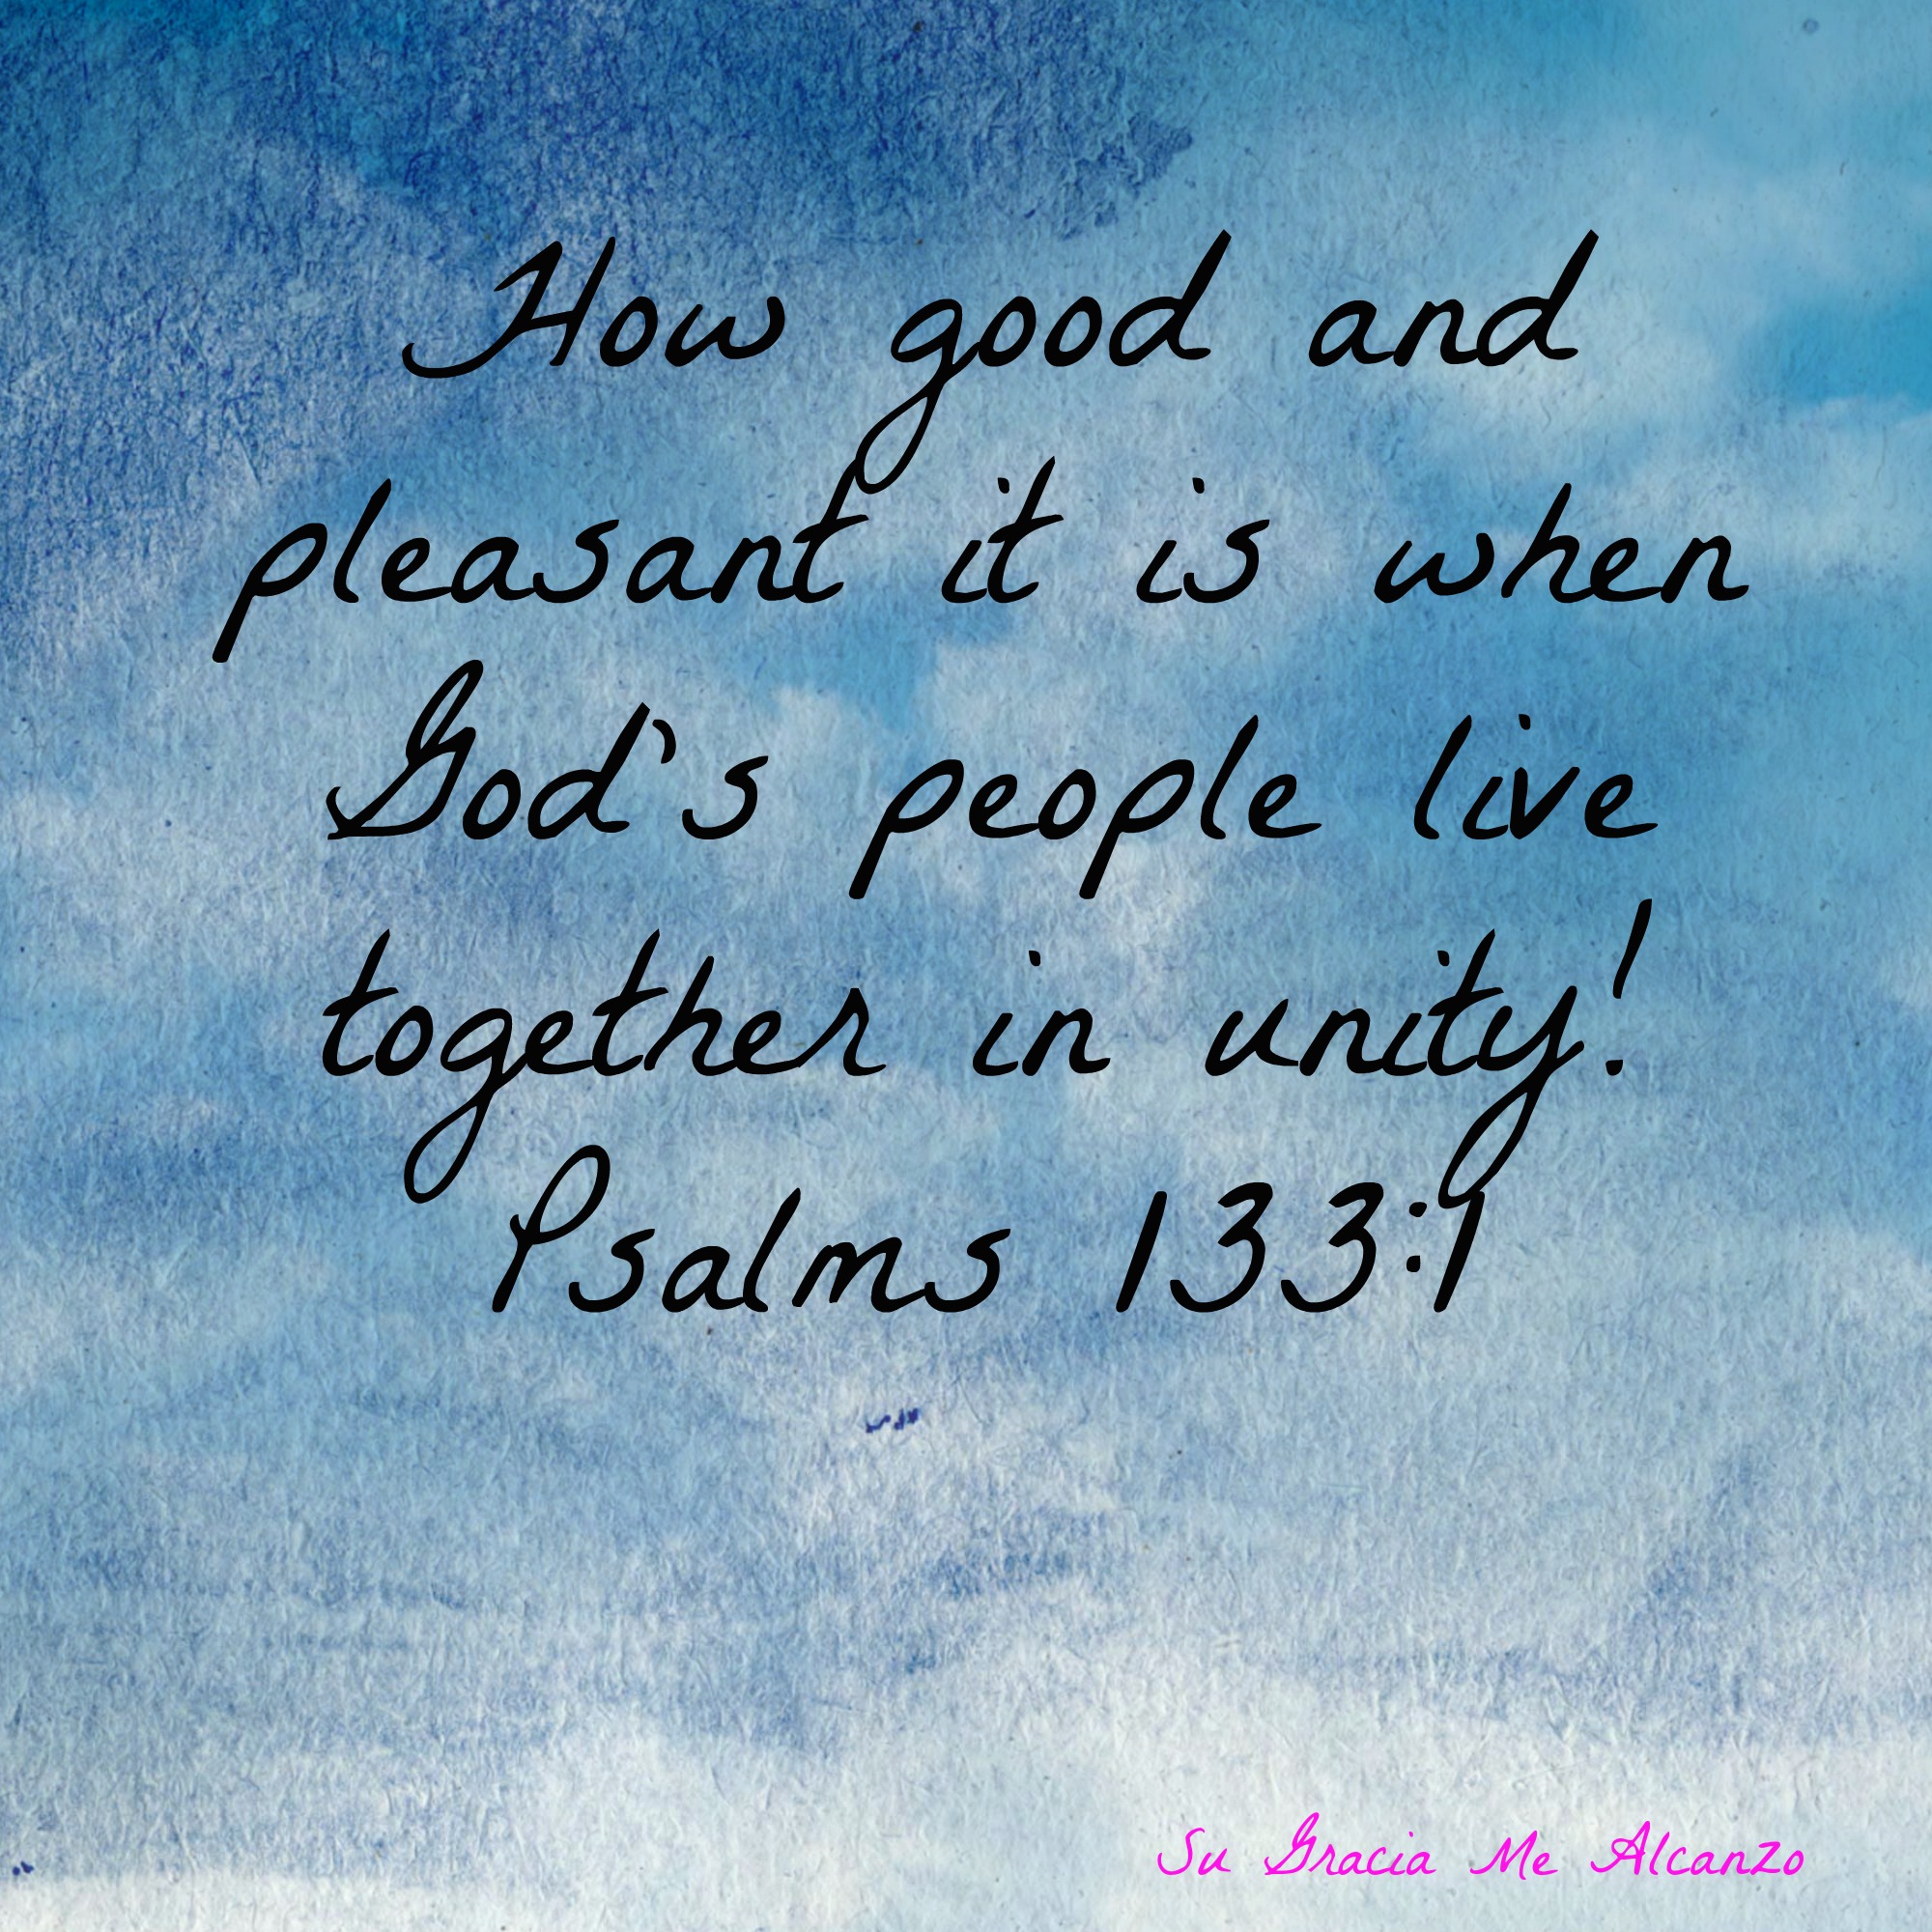 How good and pleasant it is when God's people live together in unity